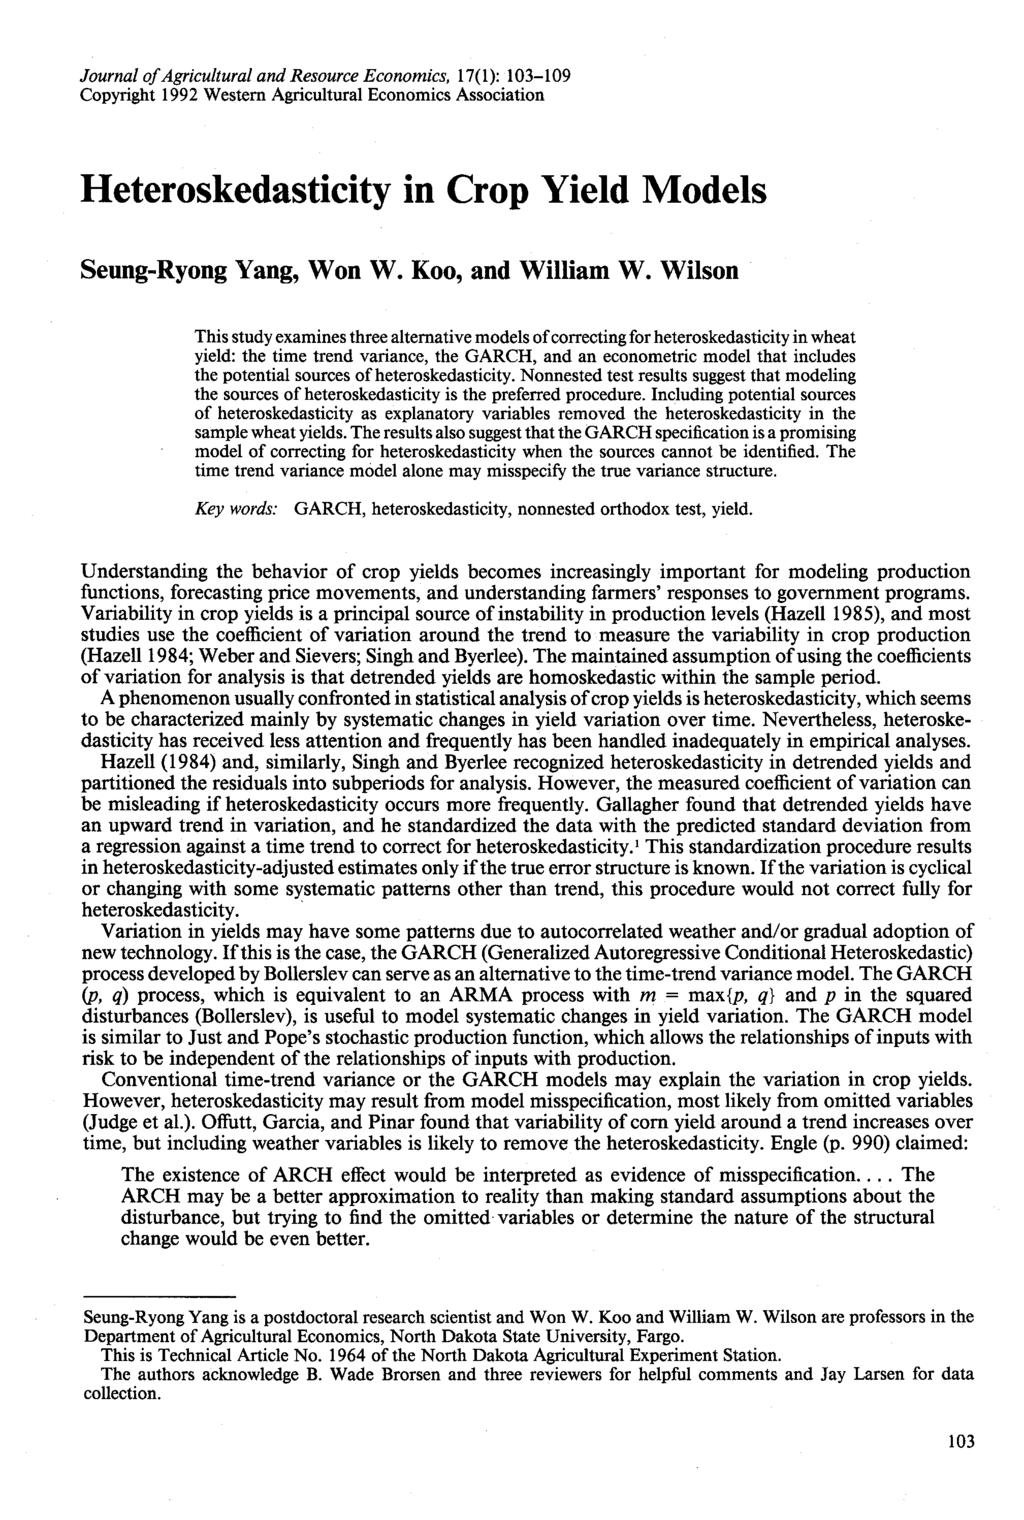 Journal of Agricultural and Resource Economics, 17(1): 103-109 Copyright 1992 Western Agricultural Economics Association Heteroskedasticity in Crop Yield Models Seung-Ryong Yang, Won W.